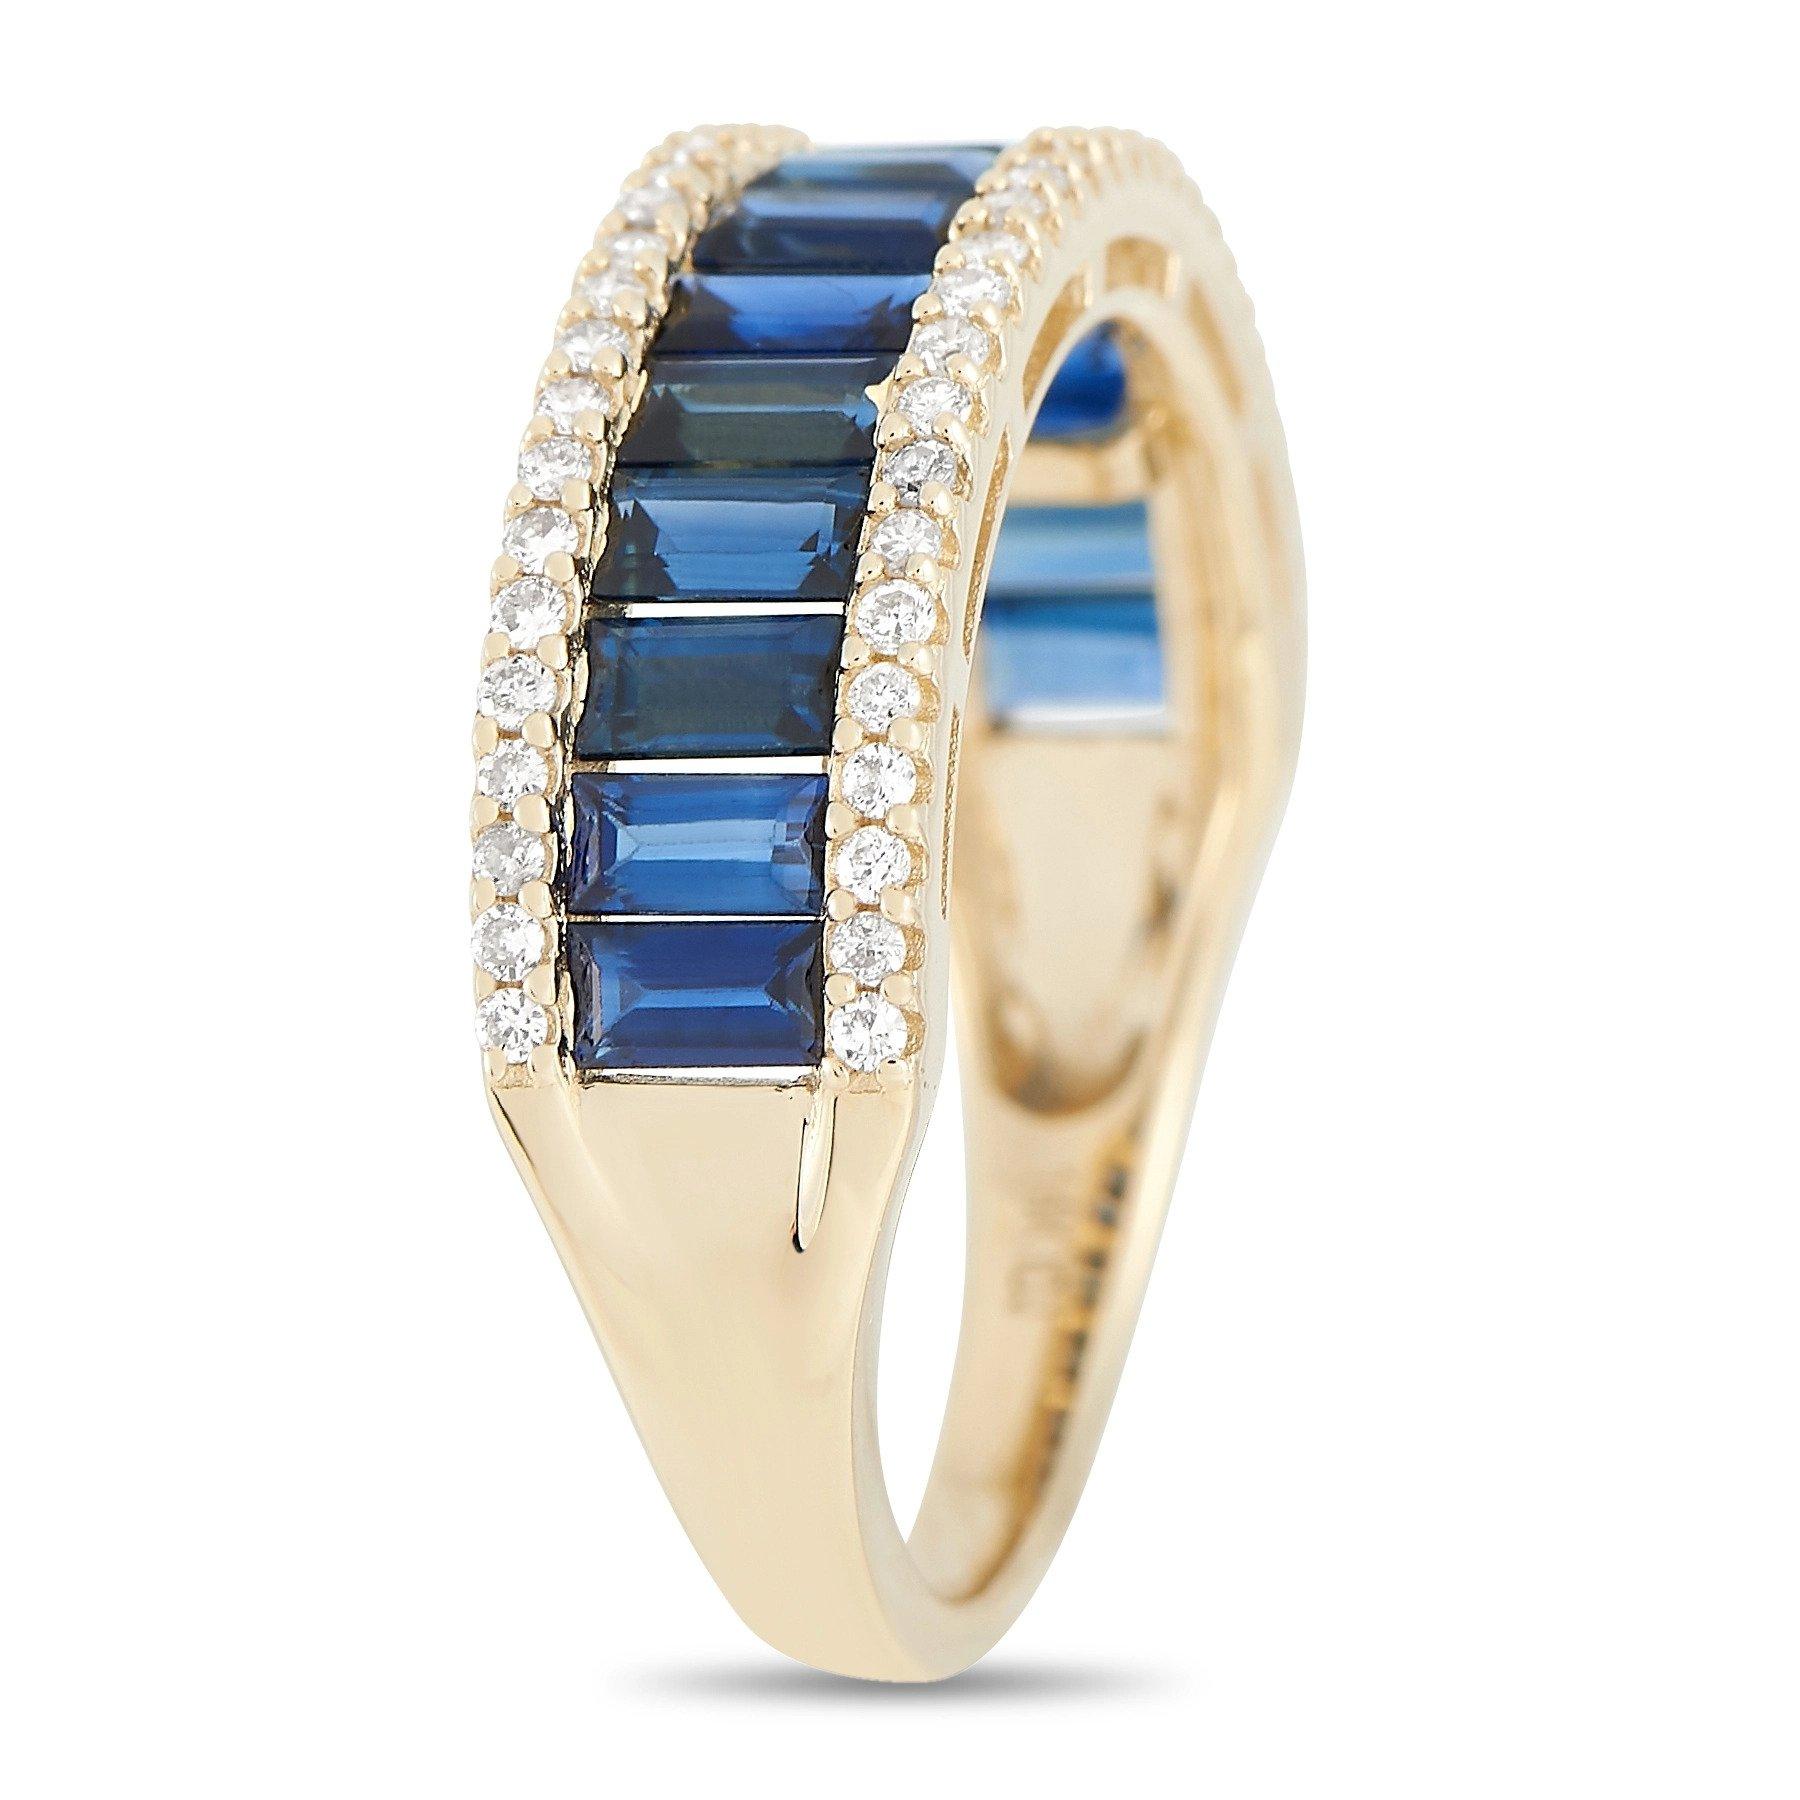 This lovely, luxurious design will add a touch of color and sparkle to absolutely any outfit. At the center of the simple 14K Yellow Gold setting - which measures 2mm wide and features a top height of 3mm - you’ll find a series of captivating